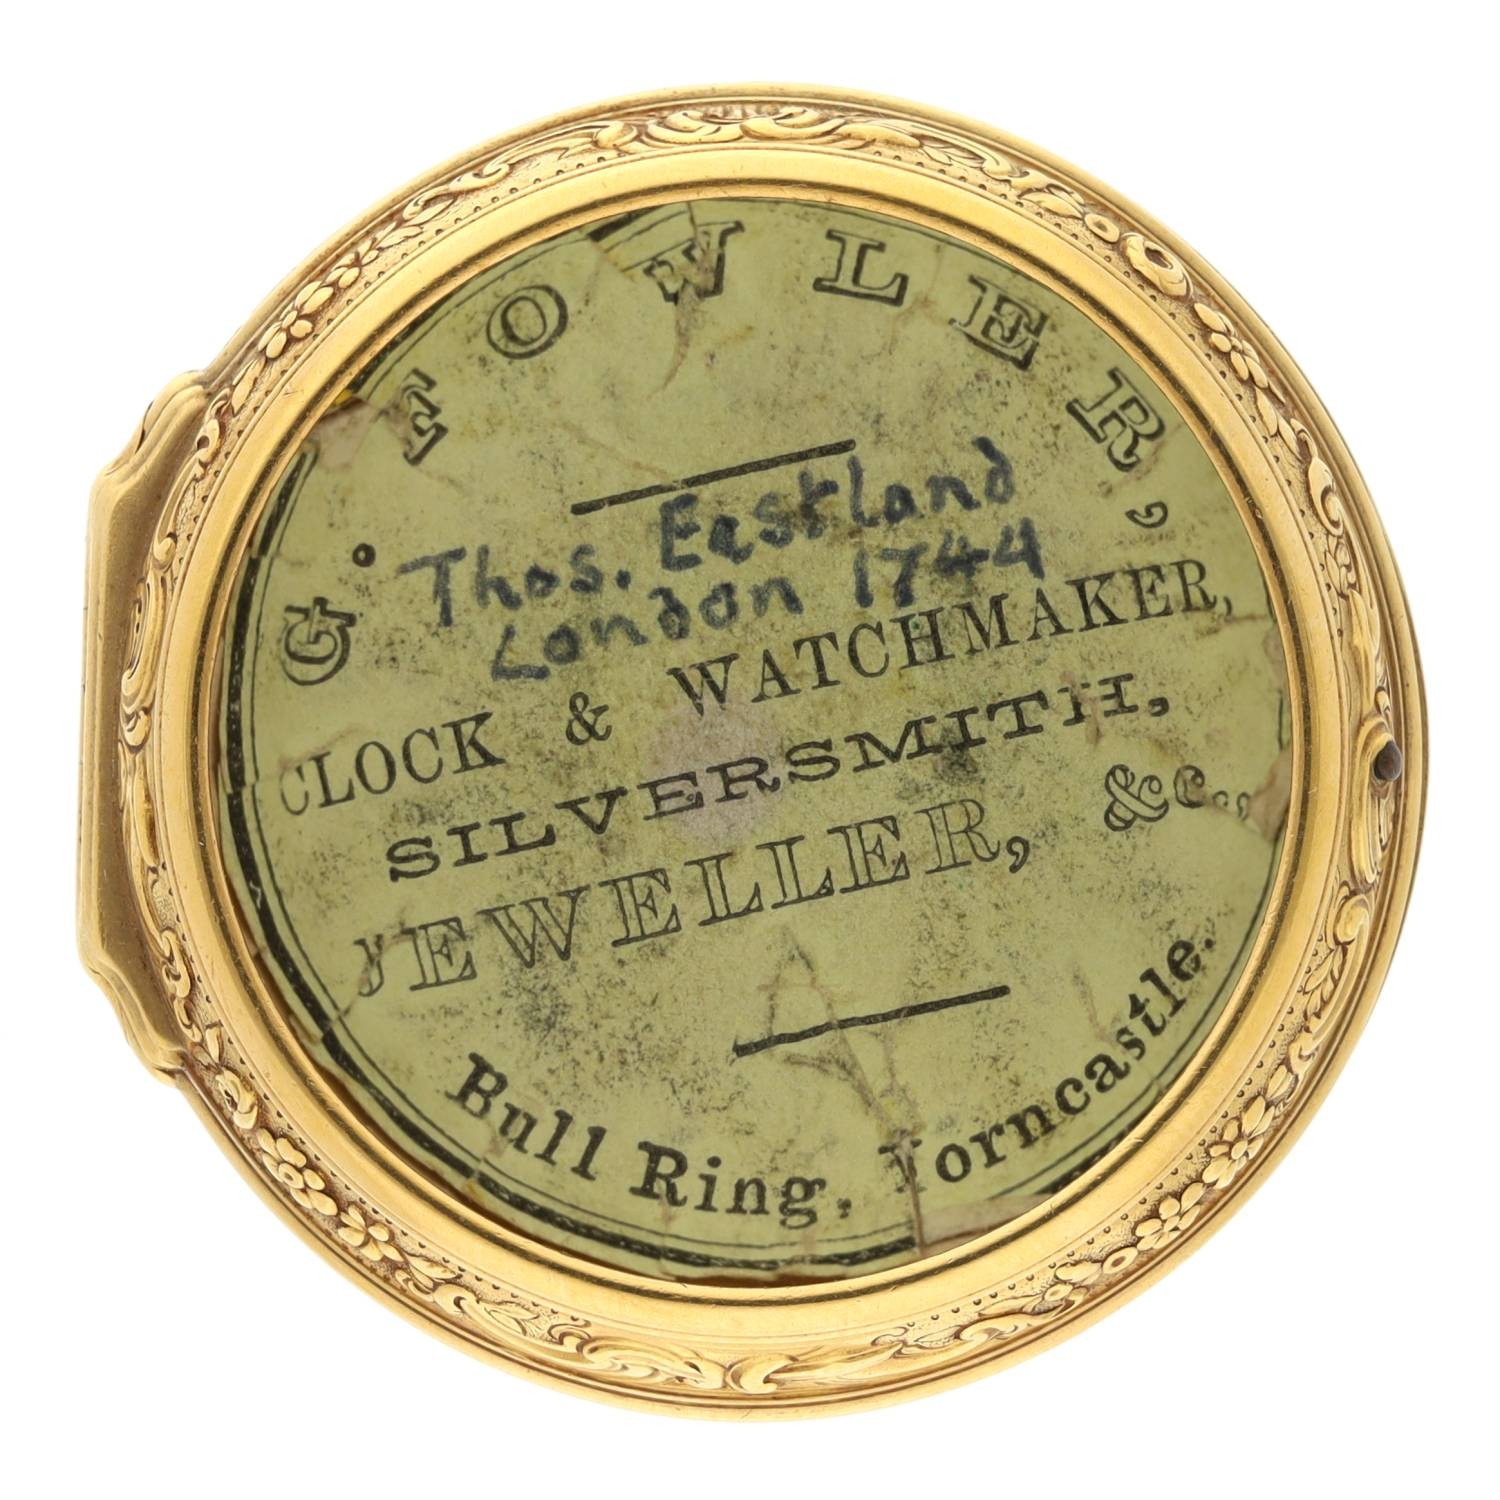 Thomas Eastland, London - Fine English mid-18th century gold verge repoussé pair cased pocket watch, - Image 9 of 9